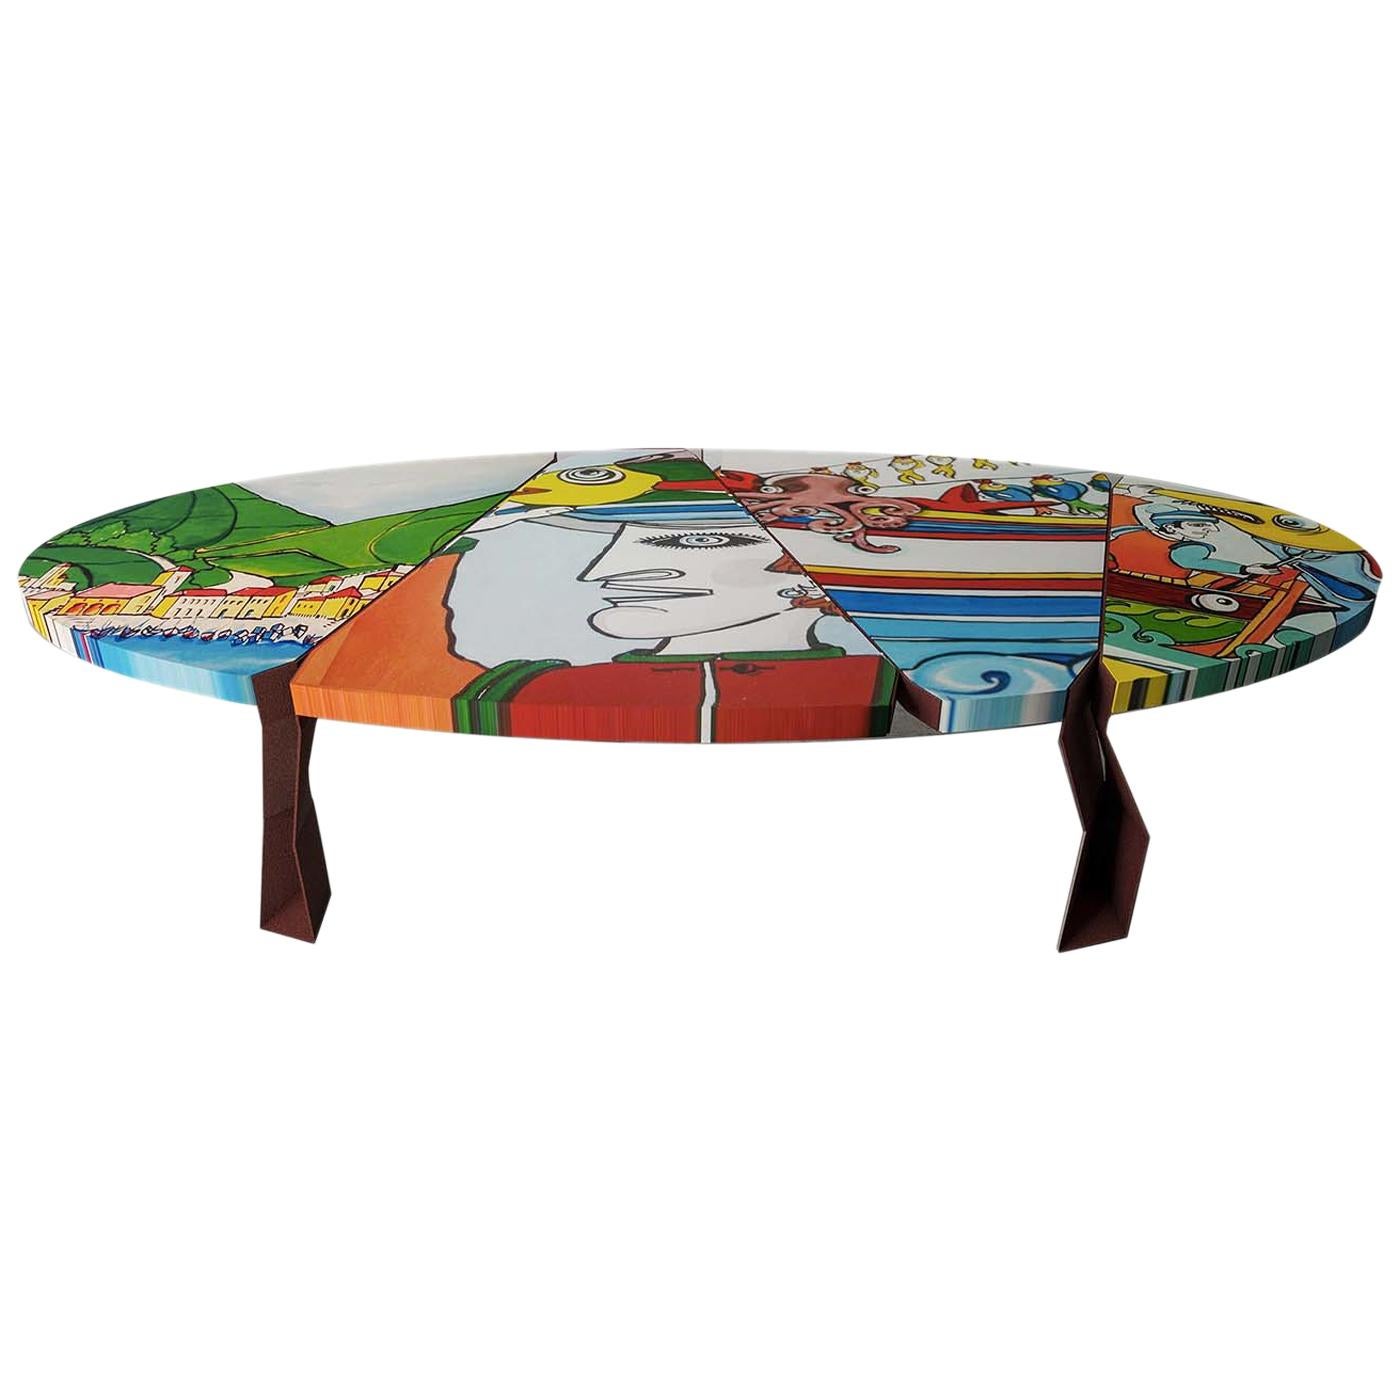 Cantastorie Limited Edition Table by Notempo